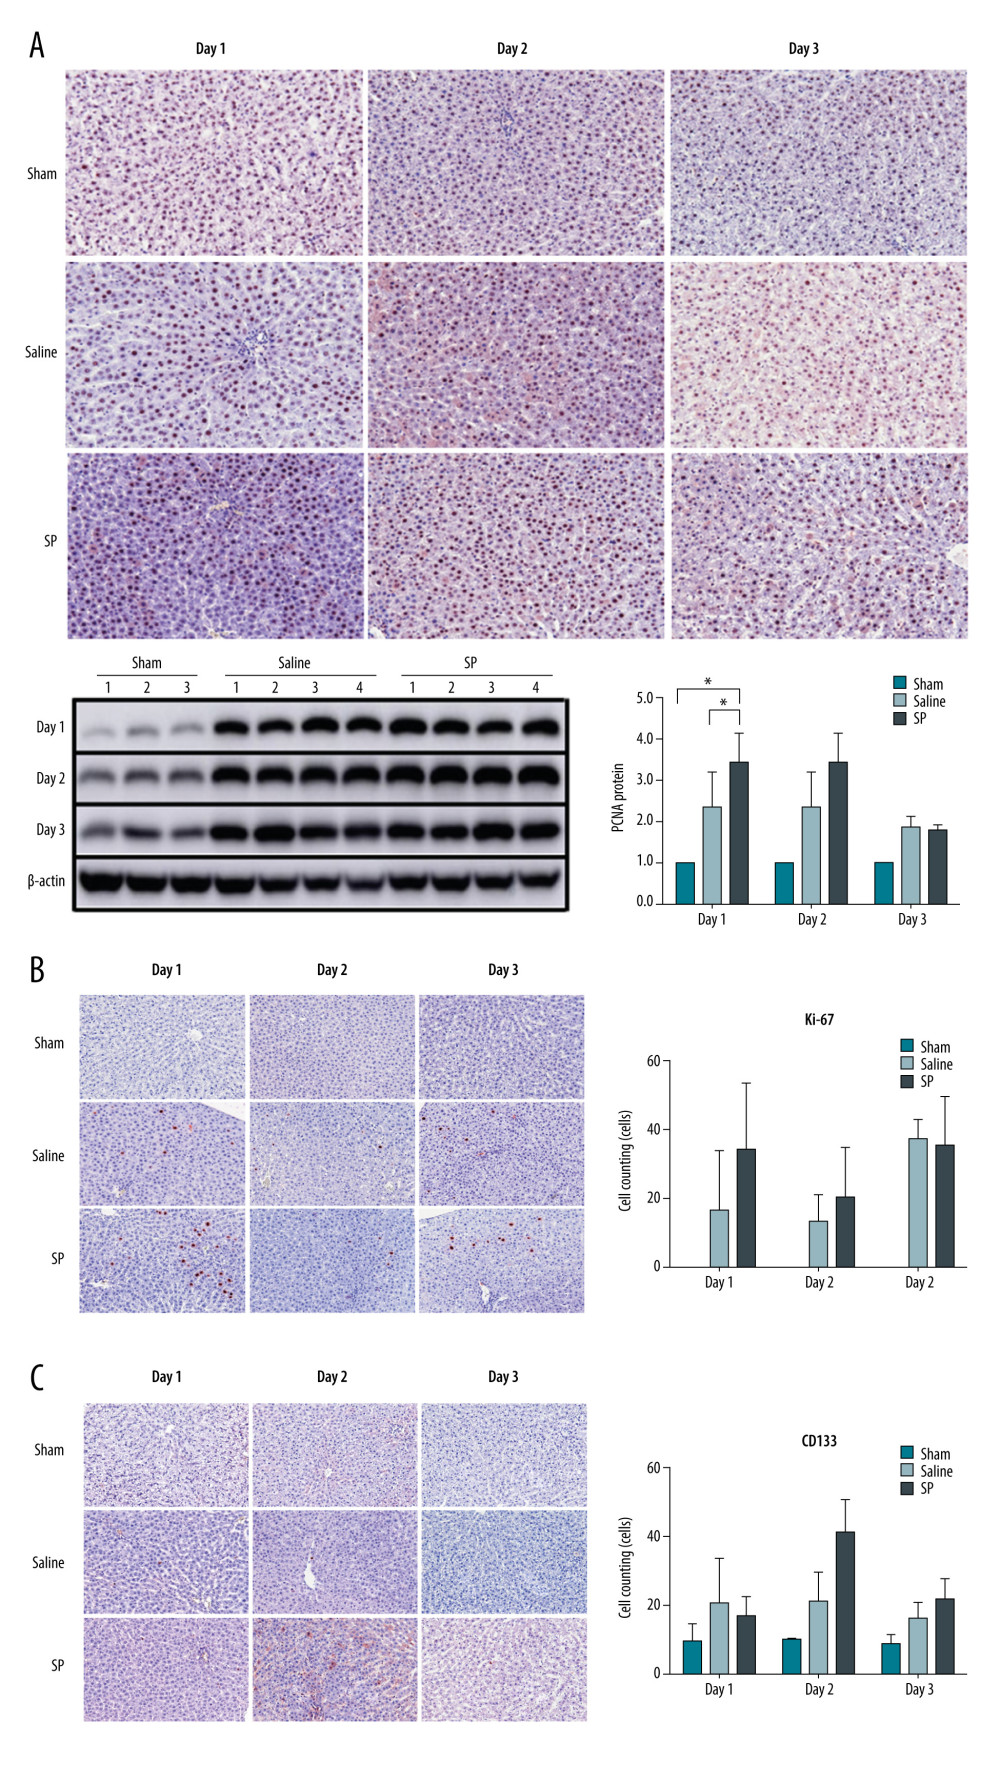 Immunohistochemical analysis of proliferating cell nuclear antigen (PCNA), Ki-67, and CD133 upon substance P (SP) injection after hepatectomy. After hepatectomy, SP was injected on days 1, 2, and 3. Paraffin blocks of tissues from each group were prepared by sectioning and stained using the immunohistochemistry method with PCNA (A), Ki-67 (B), and CD133 (C) antibodies. Prism, version 5 (GraphPad Software, Inc., San Diego, USA) was used for creation of the figure.